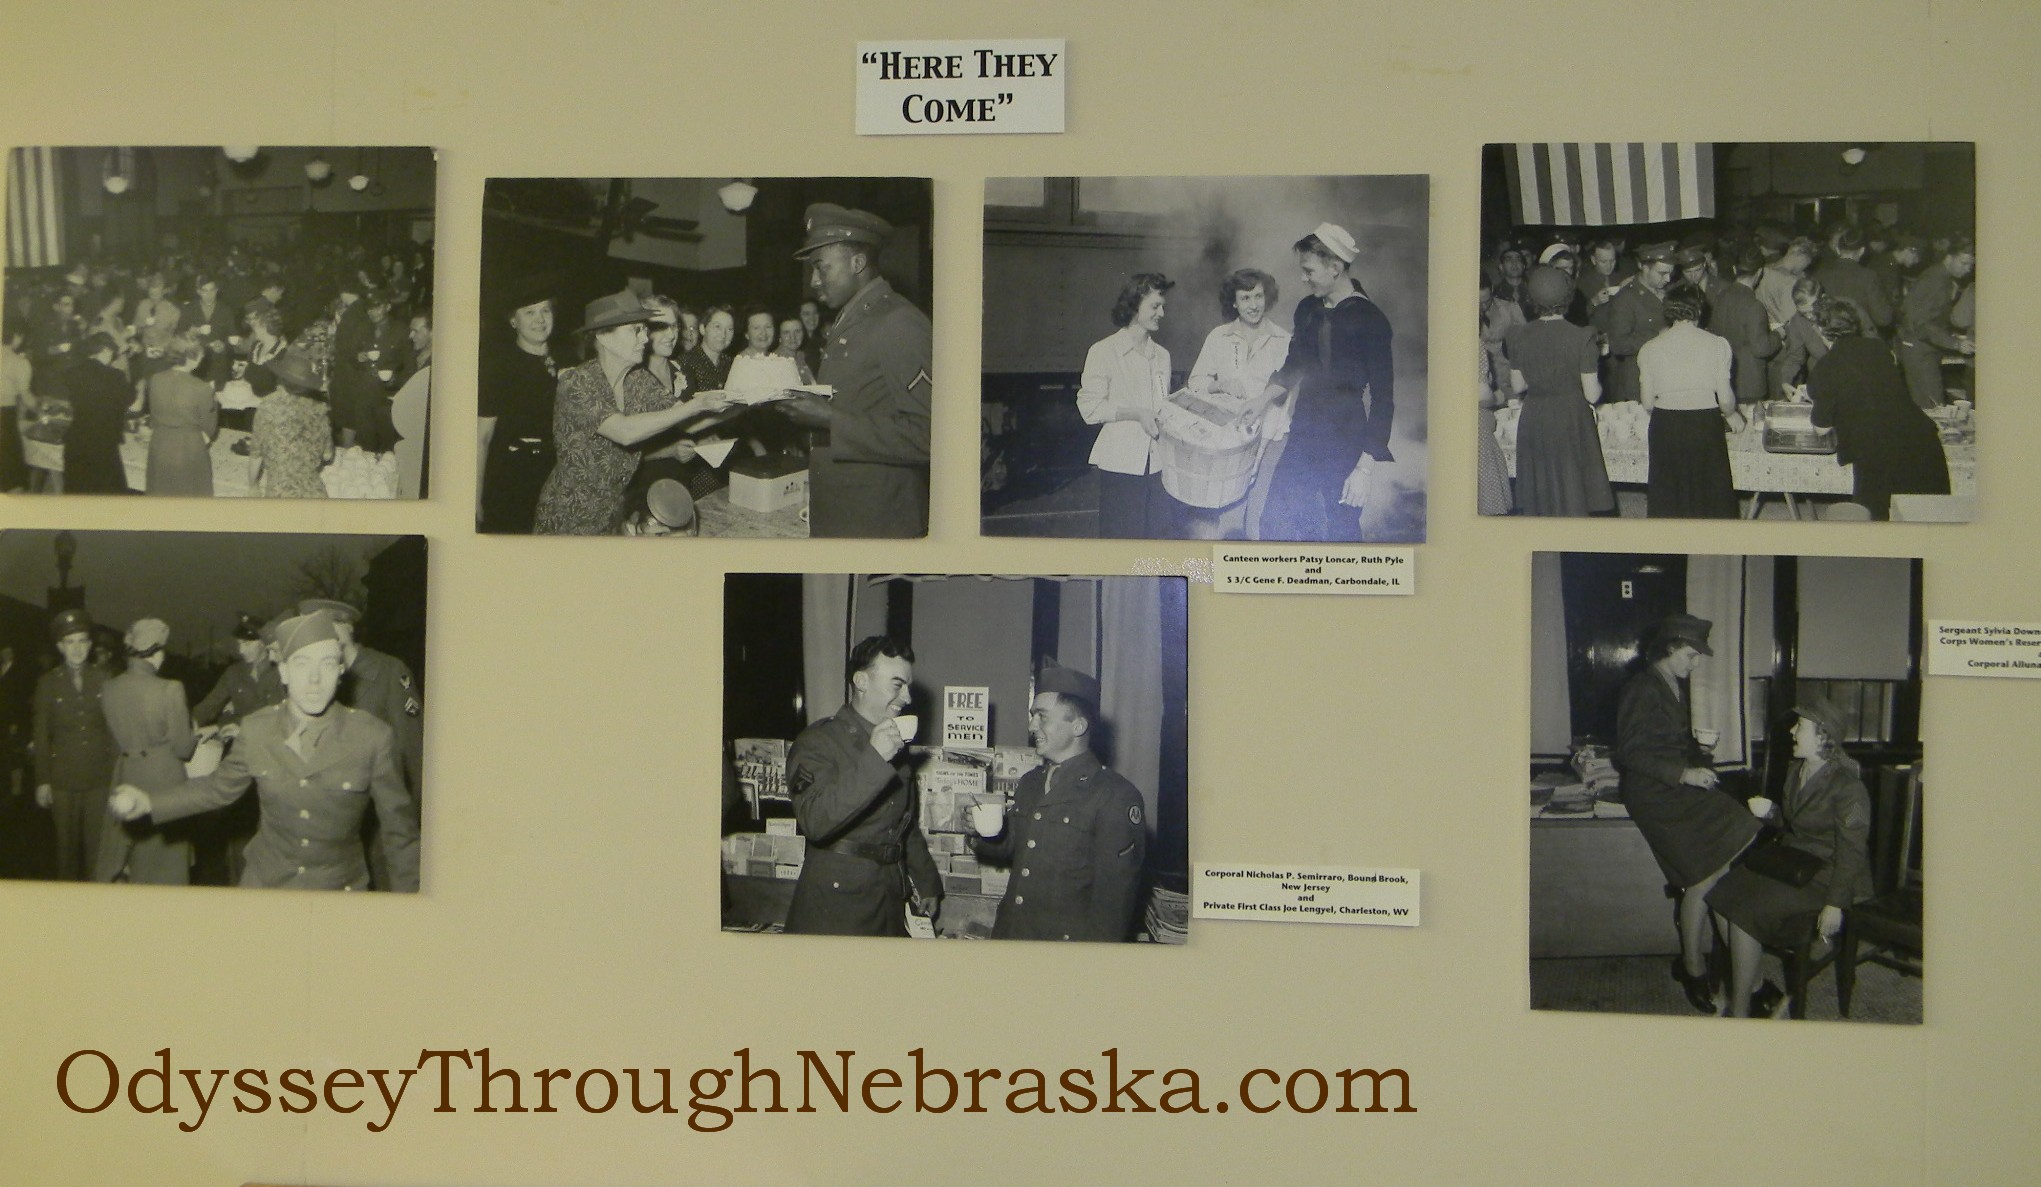 The North Platte Canteens served World War 2 soldiers on the home front